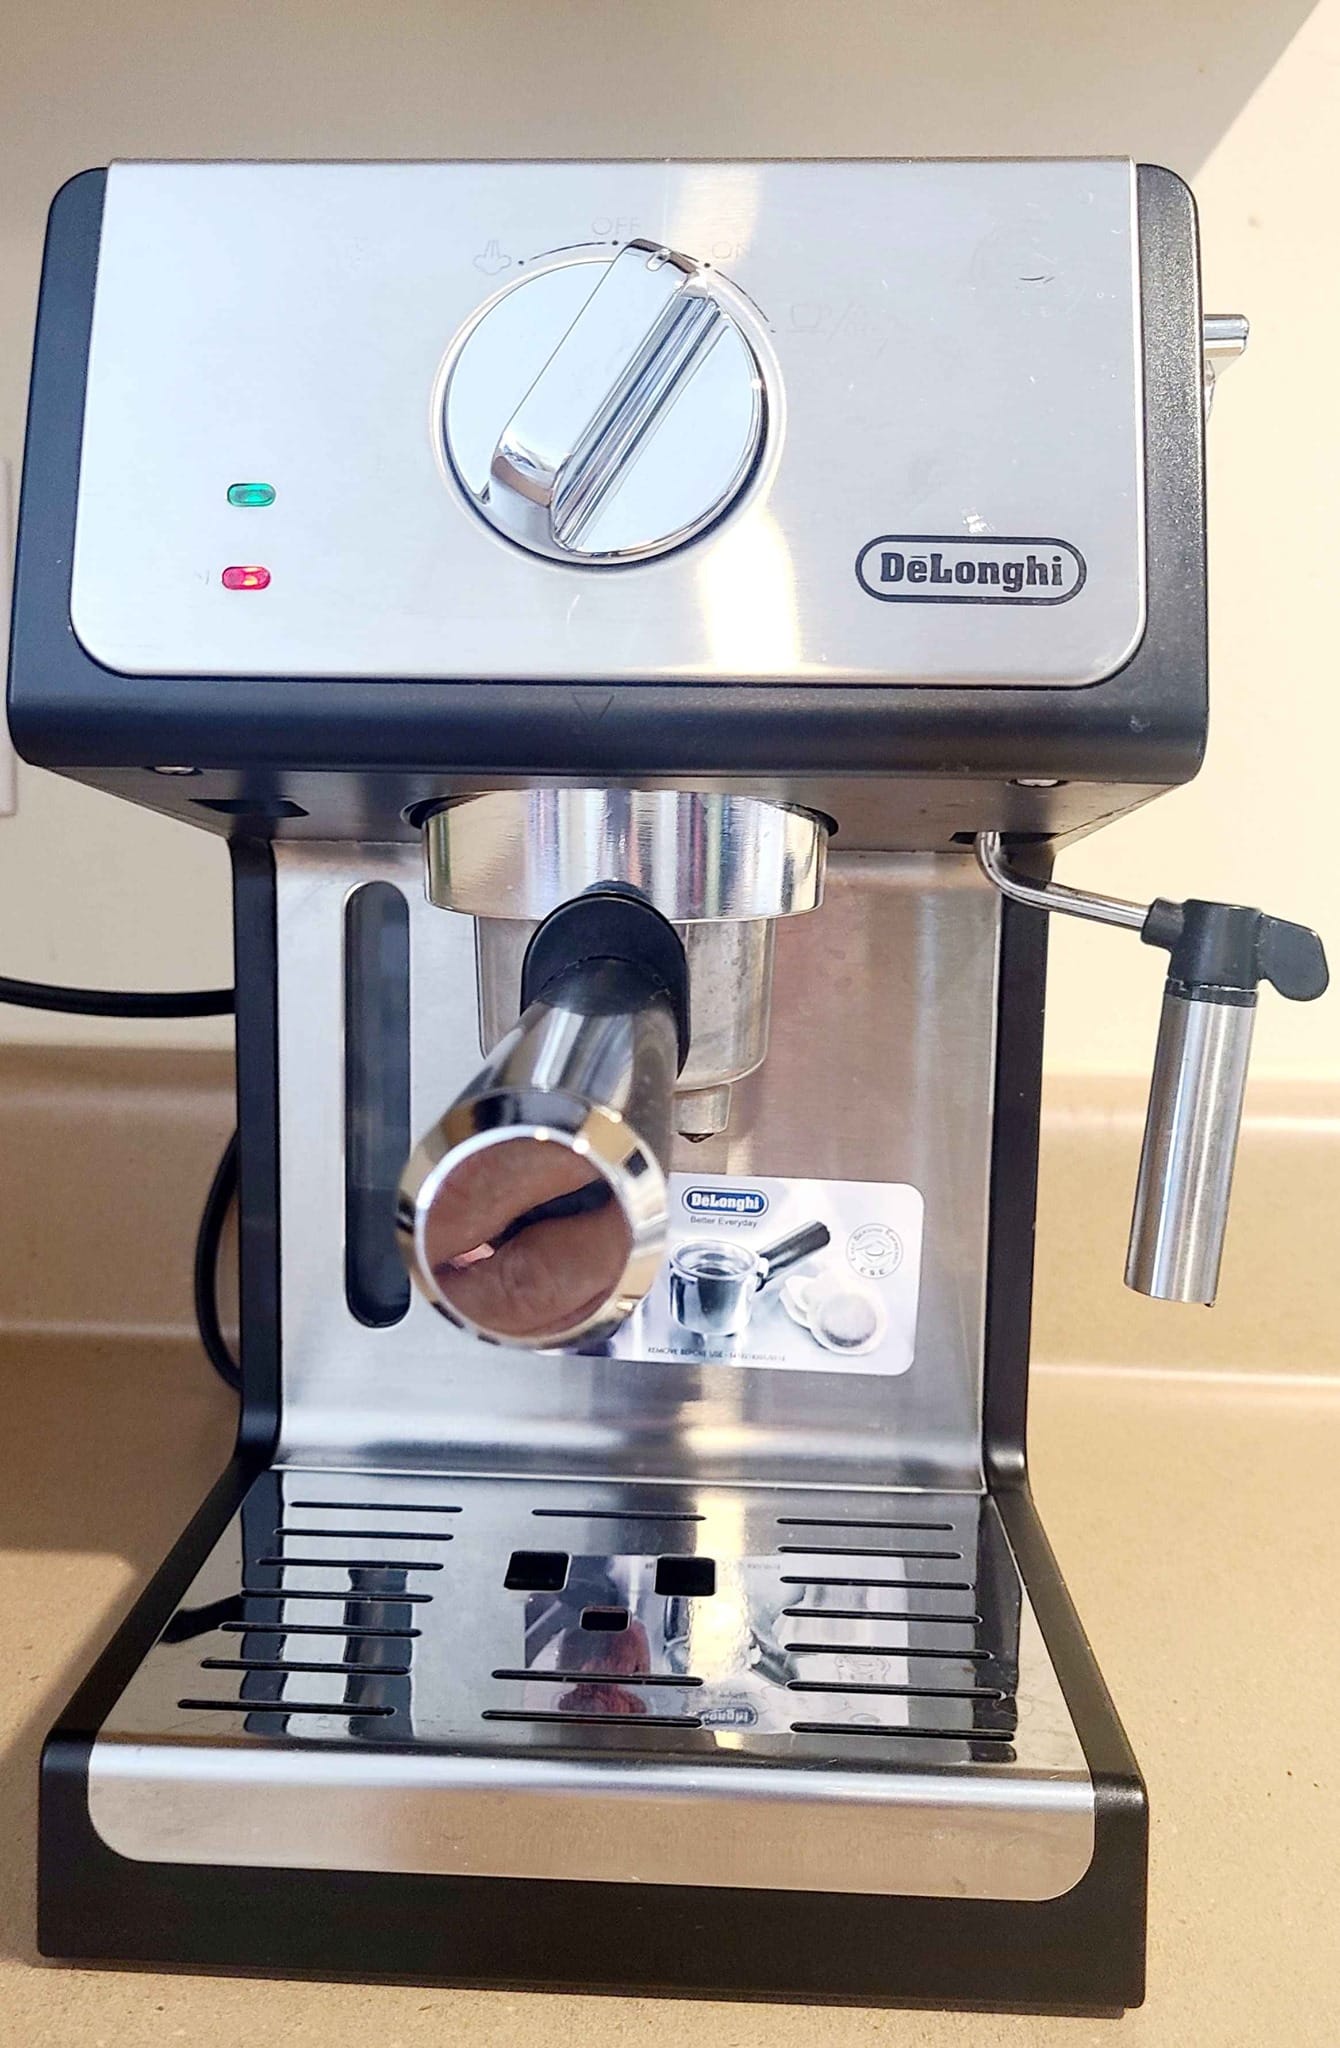 ECP3420 delivers great coffee flavor from the first cup